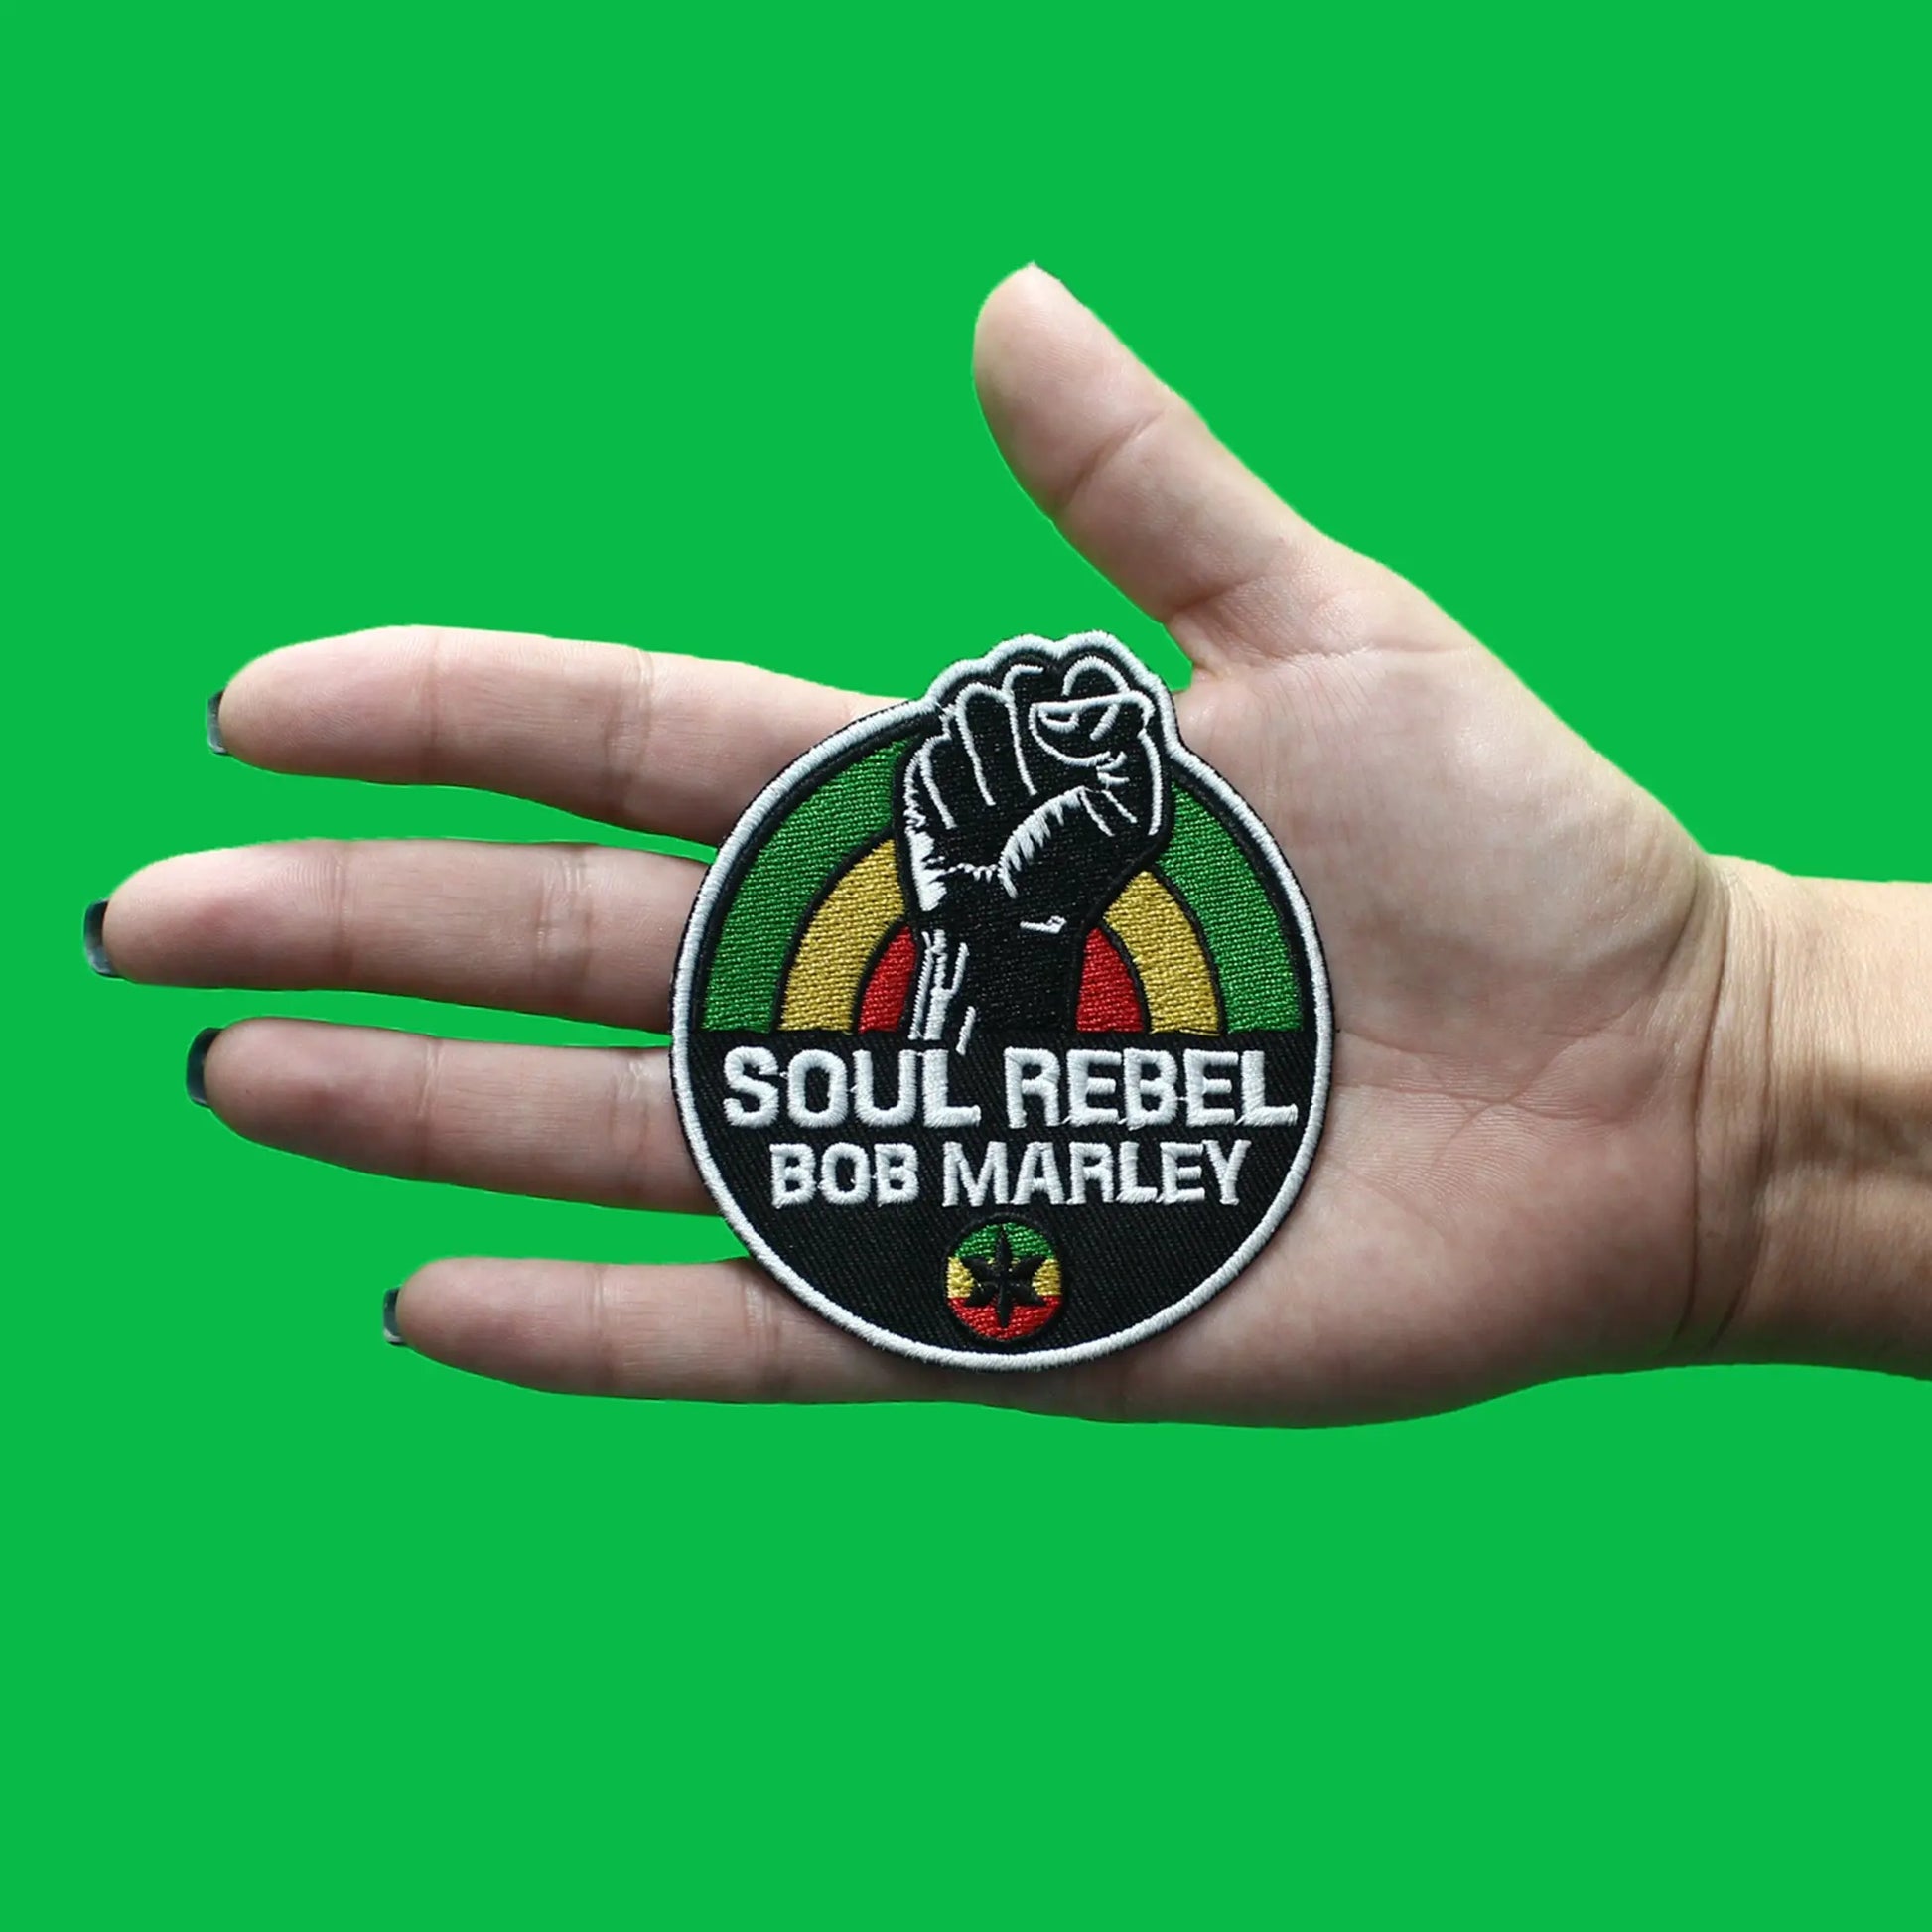 Bob Marley Soul Rebel Fist Patch Jamaican Reggae Artist Embroidered Iron On